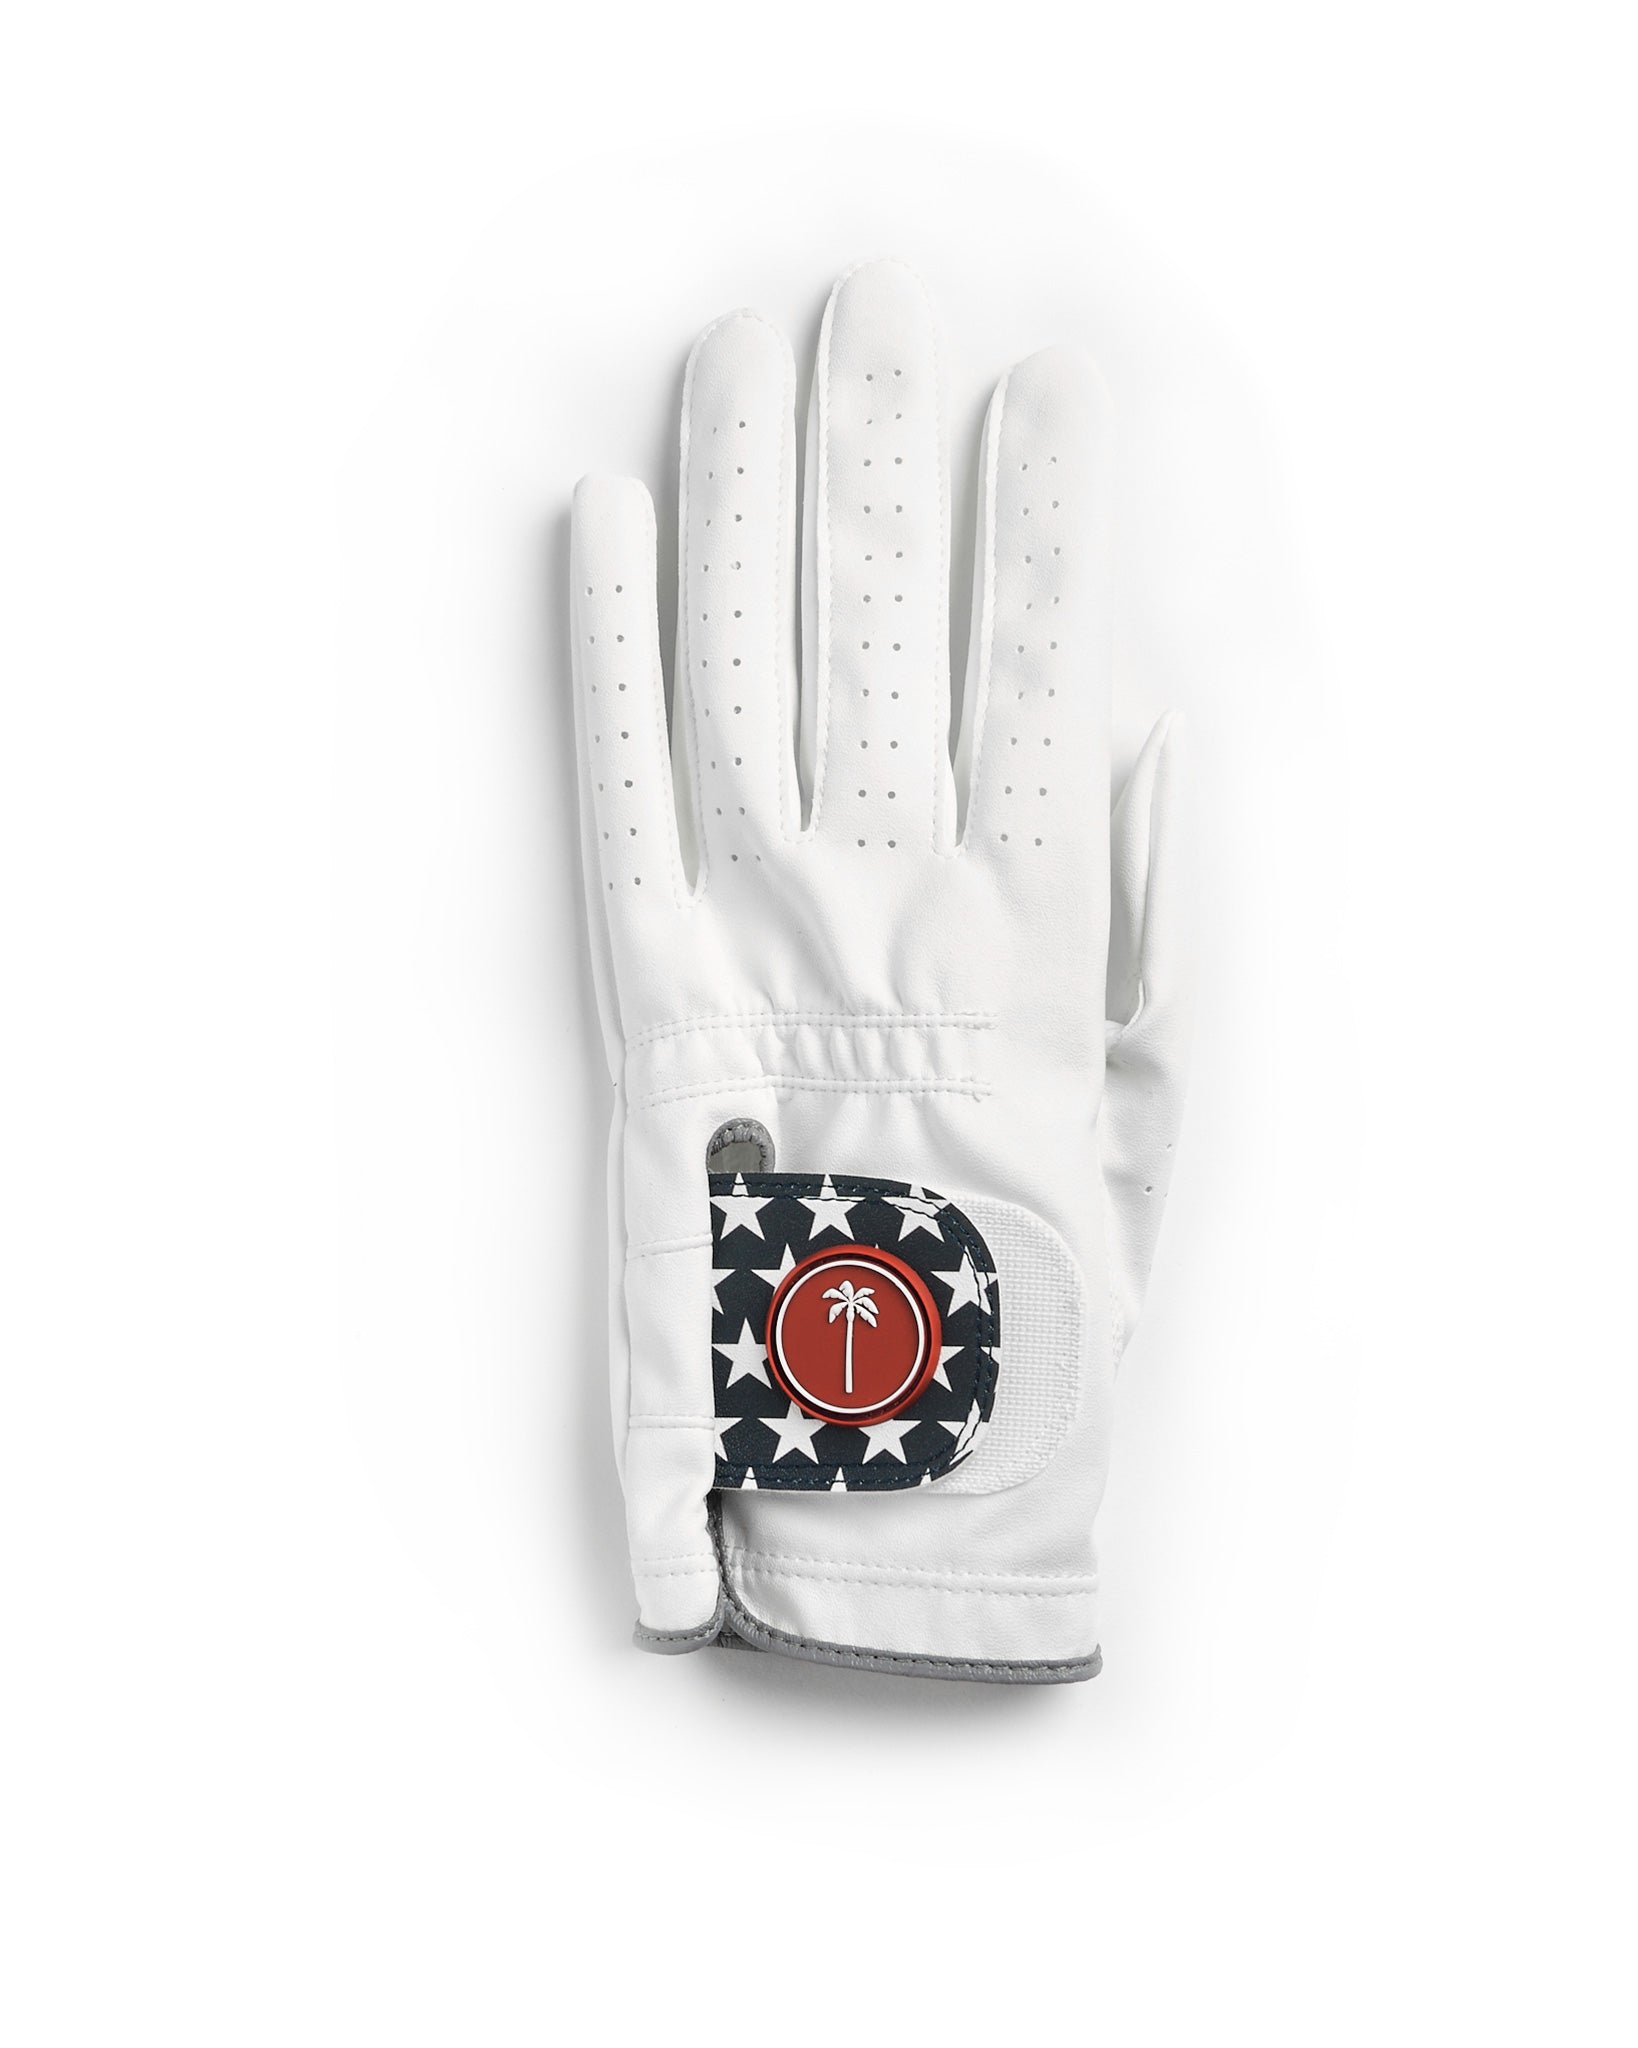 Men's AWG Stars and Stripes Glove (Vegan Leather) - Palm Golf Co.